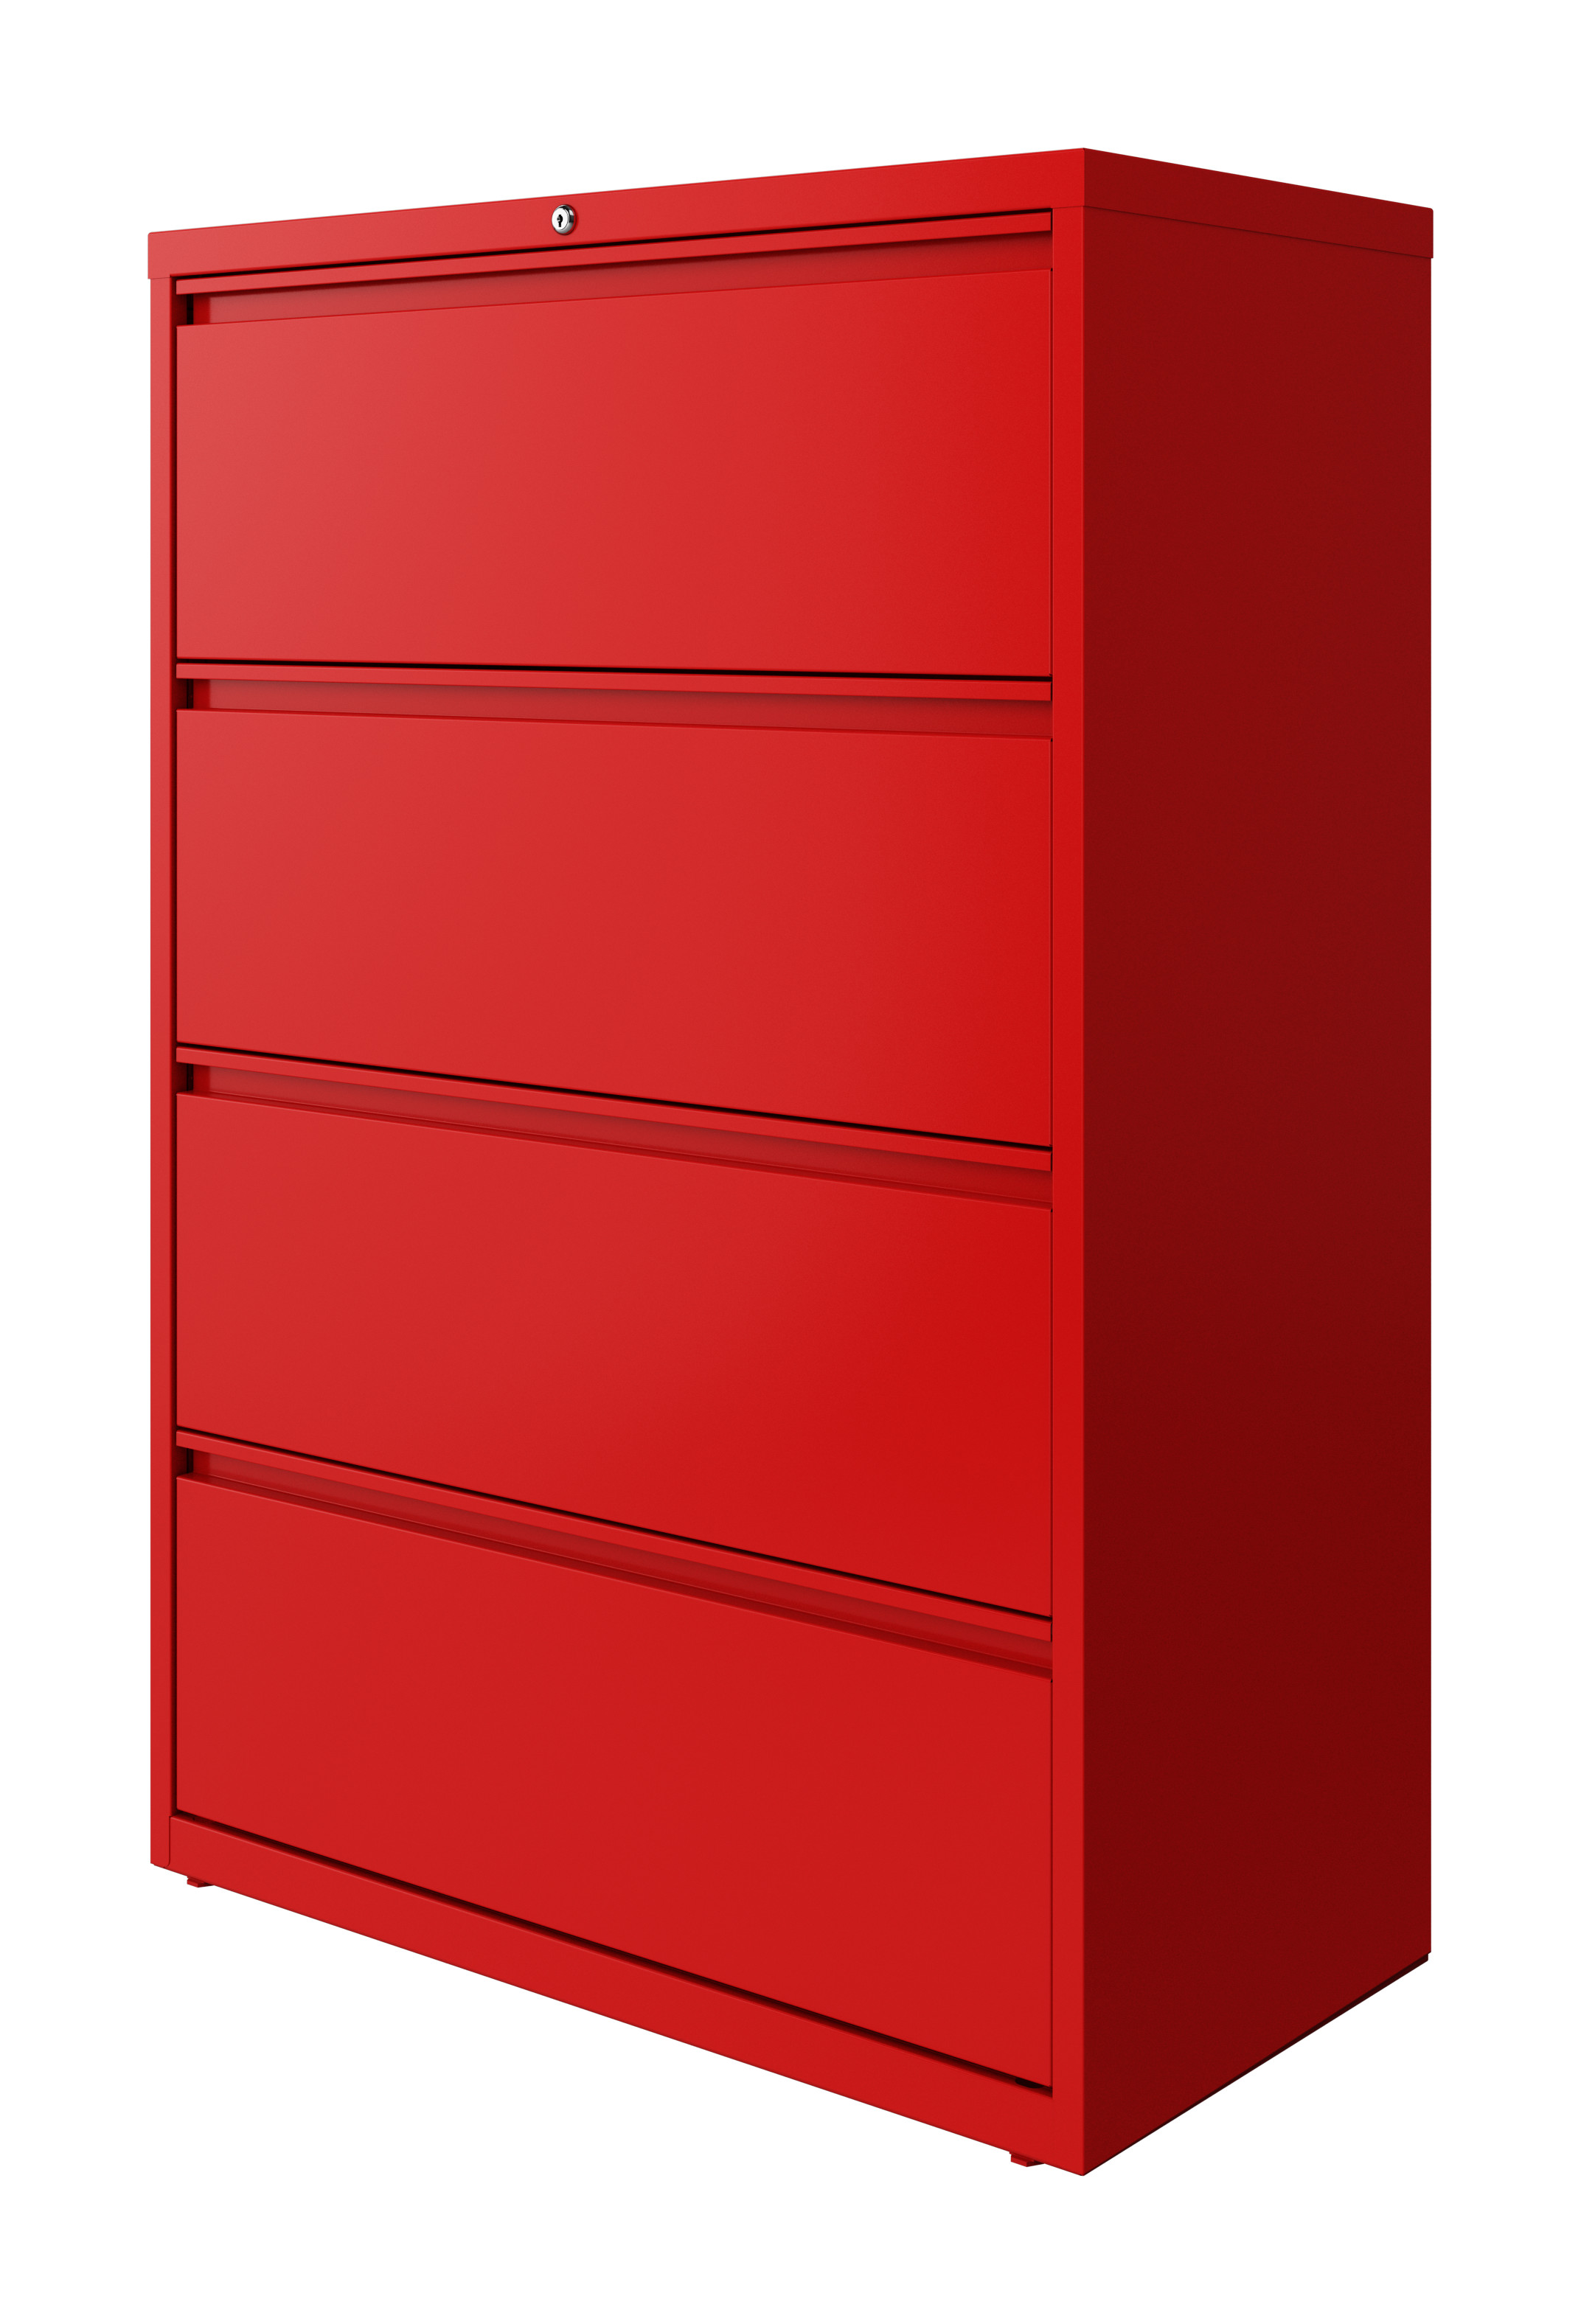 Hirsh 36 Inch Wide 4 Drawer Metal Lateral File Cabinet for Home and Office, Holds Letter, Legal and A4 Hanging Folders, Red - image 3 of 5